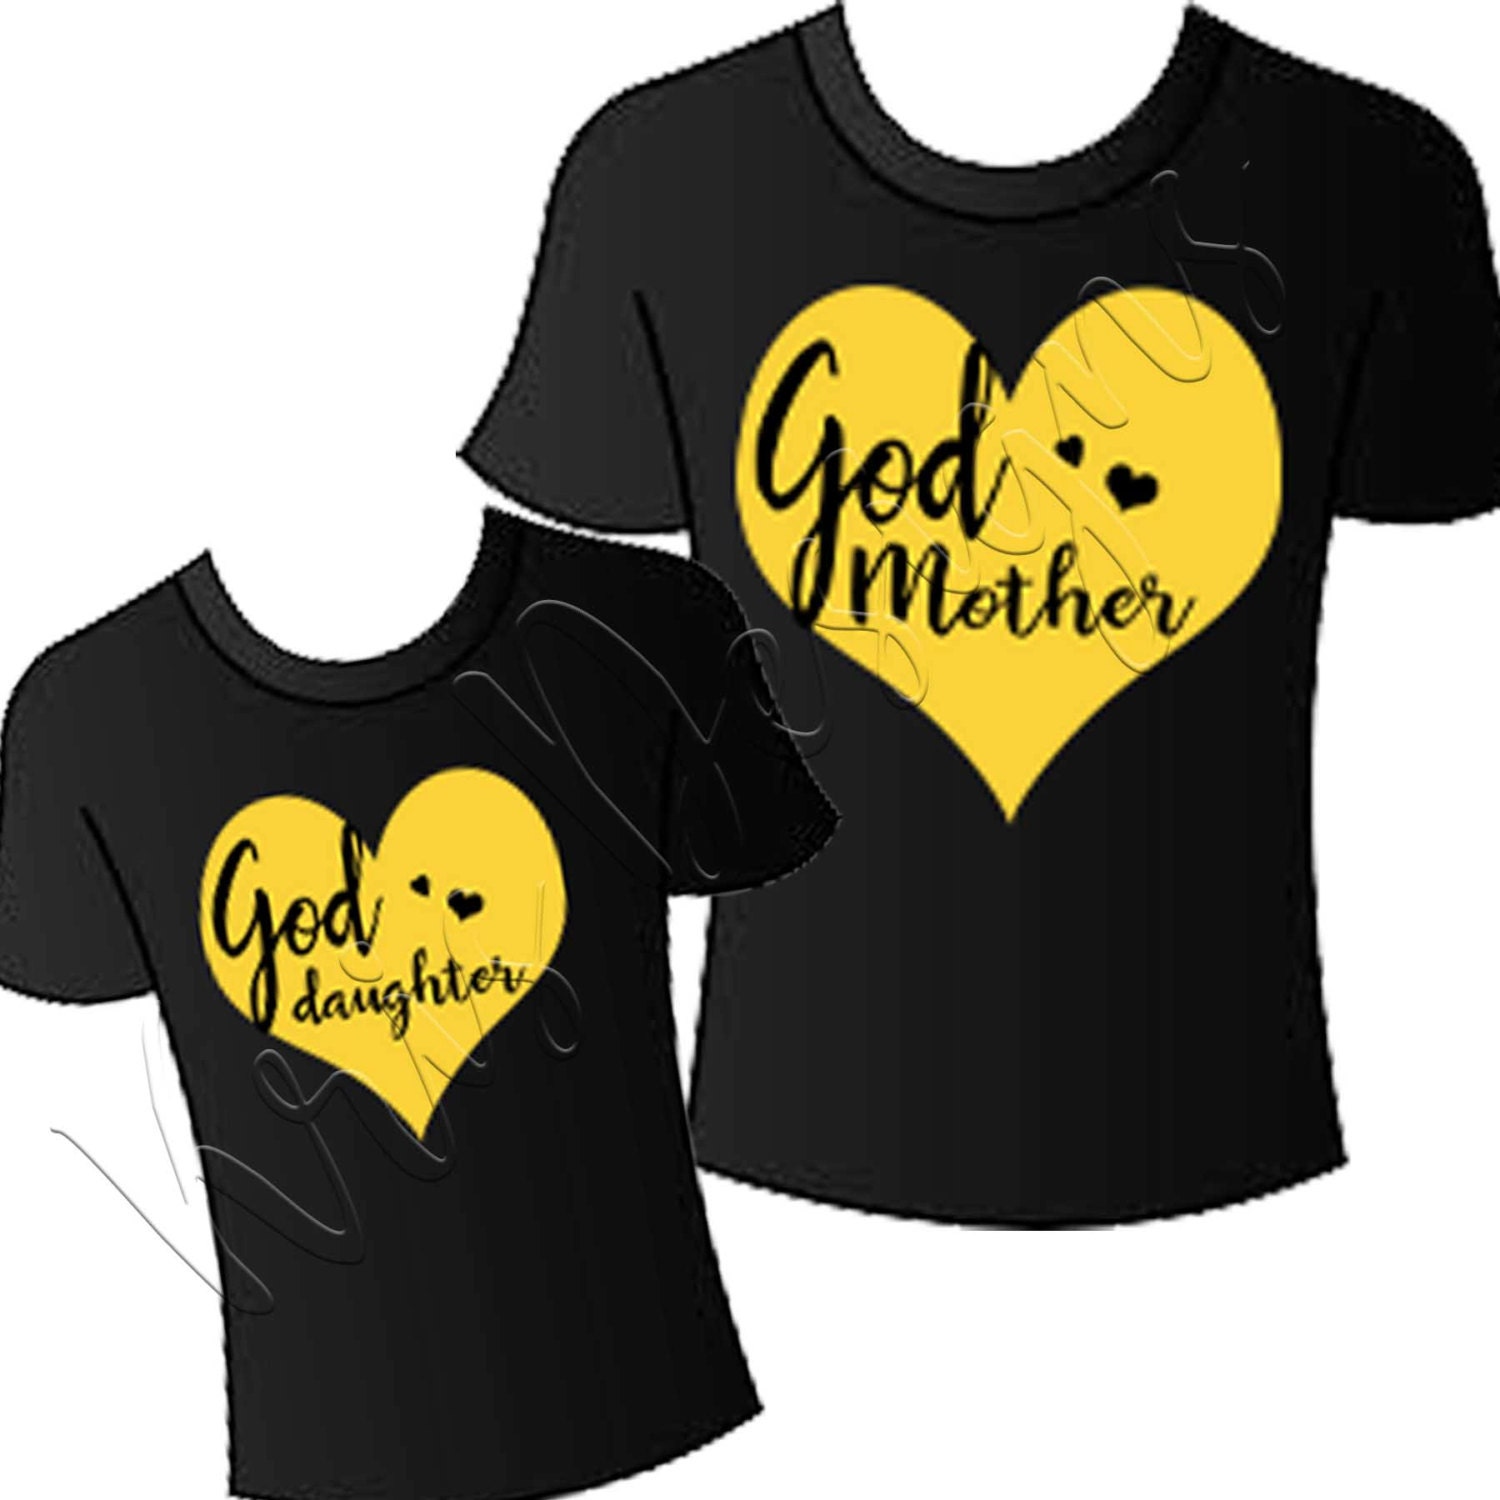 Download God Mother and God Daughter in hearts 2 svg files jpg png